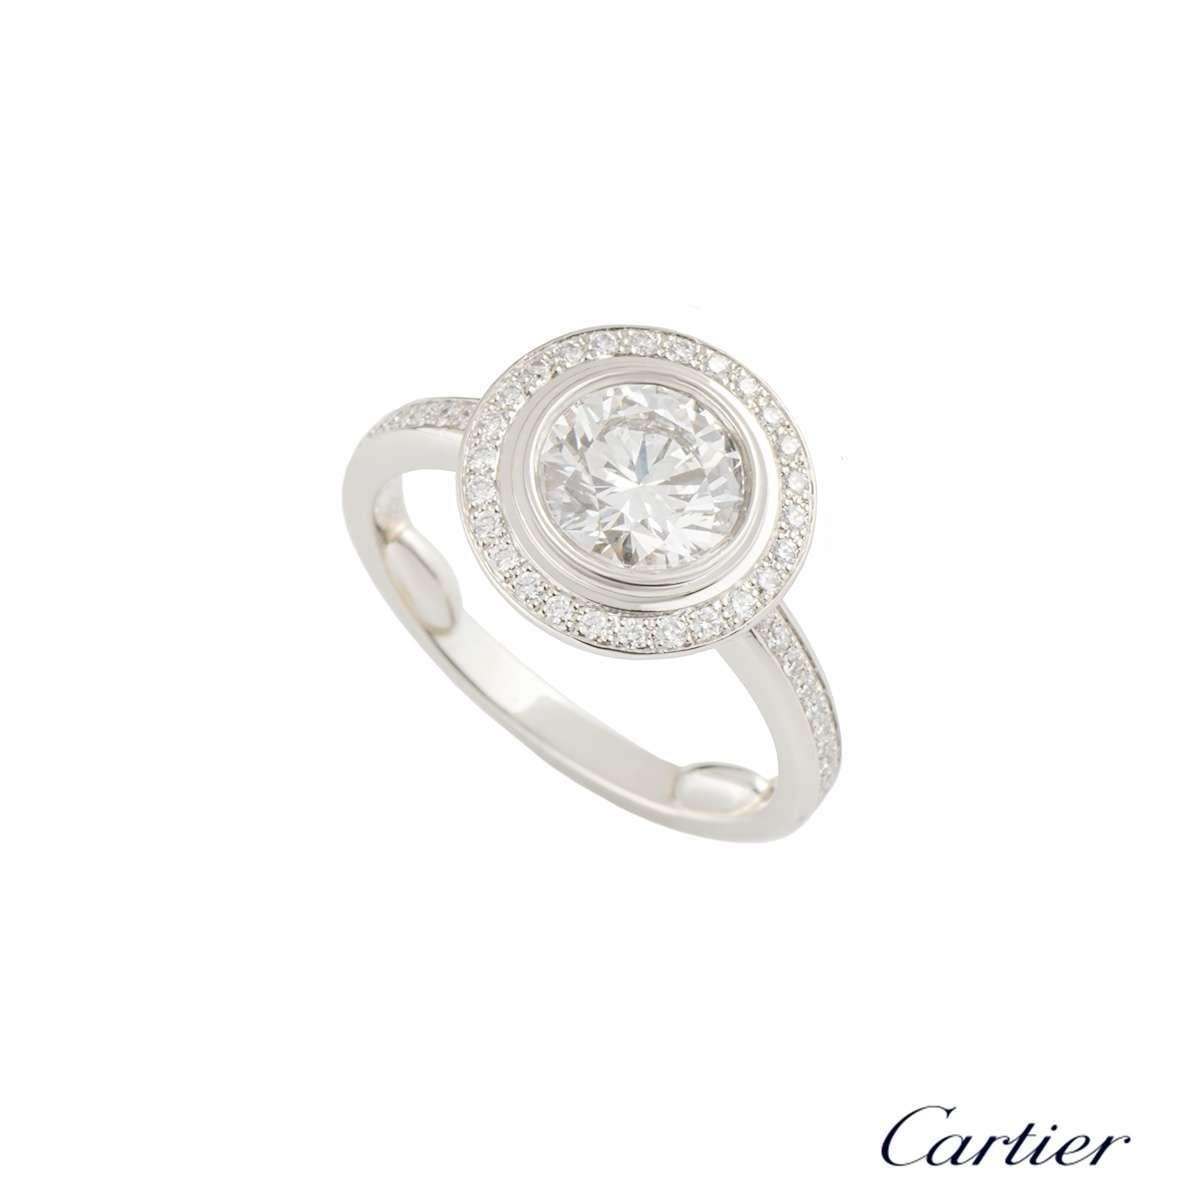 A luxurious platinum Cartier diamond engagement ring from the Cartier D'Amour collection. The ring comprises of a round brilliant cut diamond in a rubover setting with a total weight of 1.03ct, F colour and VVS1 clarity. Complementing the centre